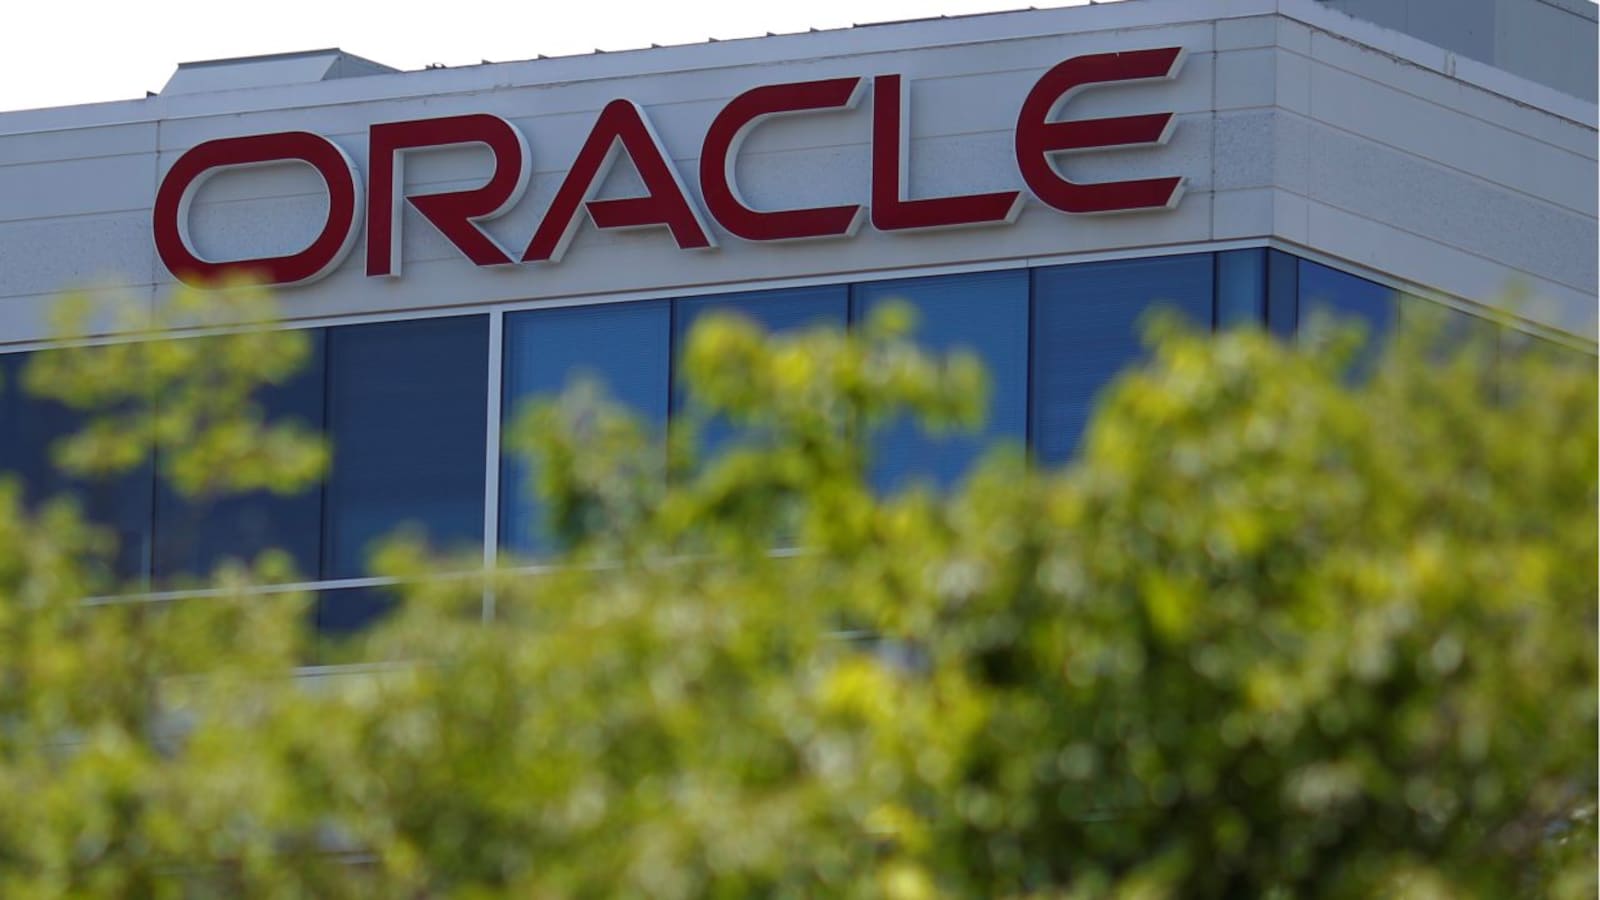 SEC says Oracle's India unit used slush funds to bribe officials for business in 2019